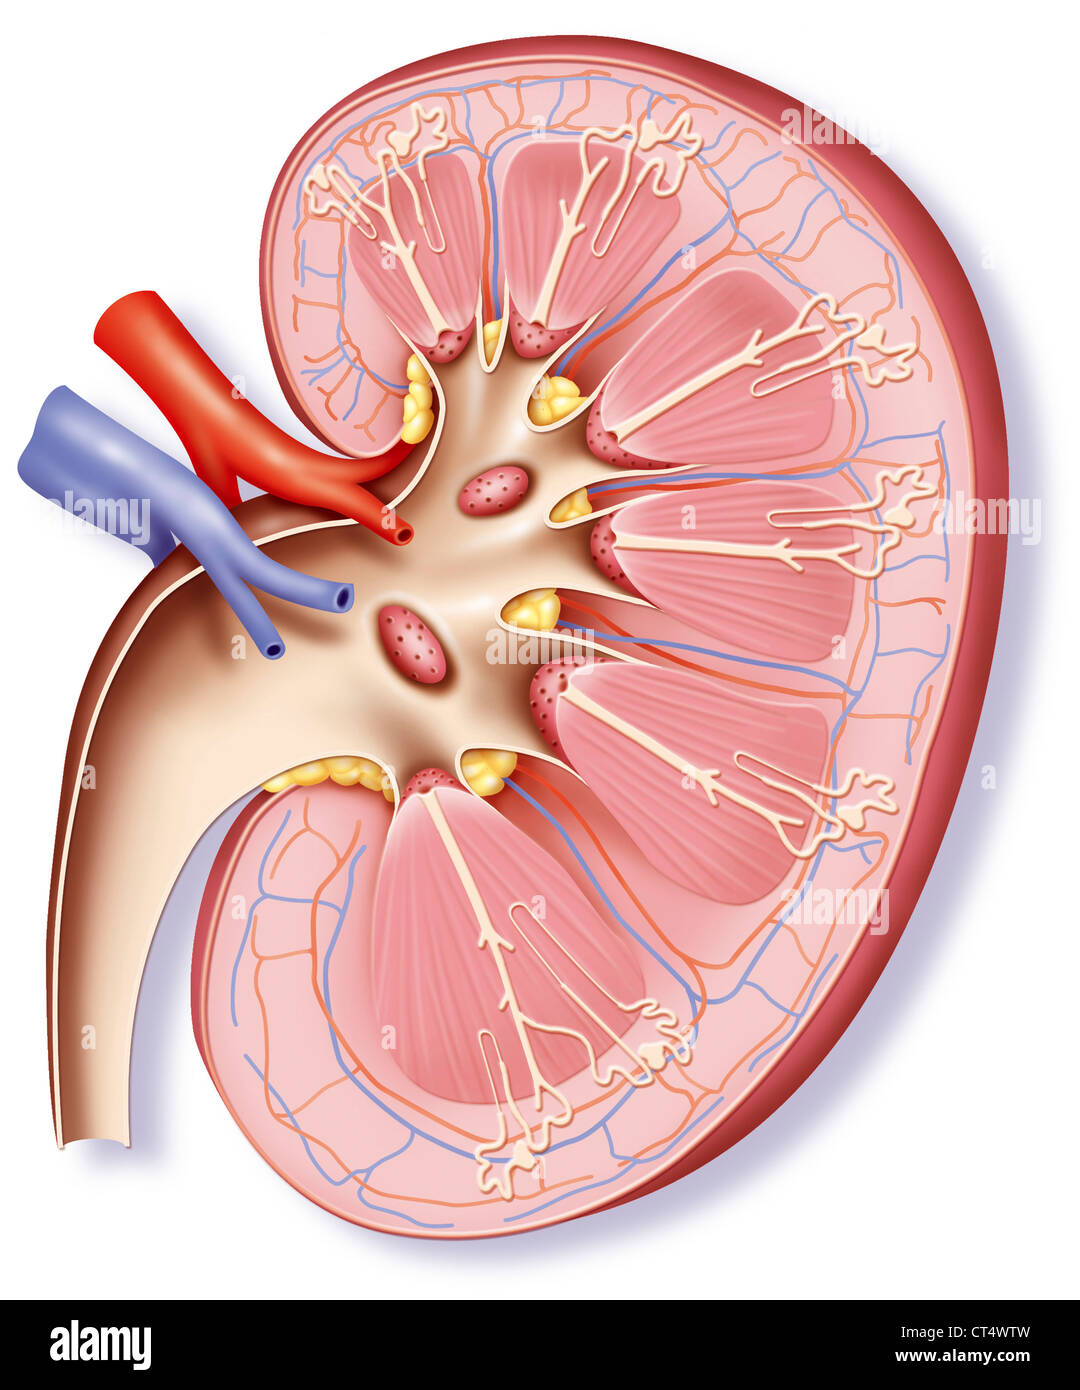 How to draw diagram of kidney easily  step by step  YouTube